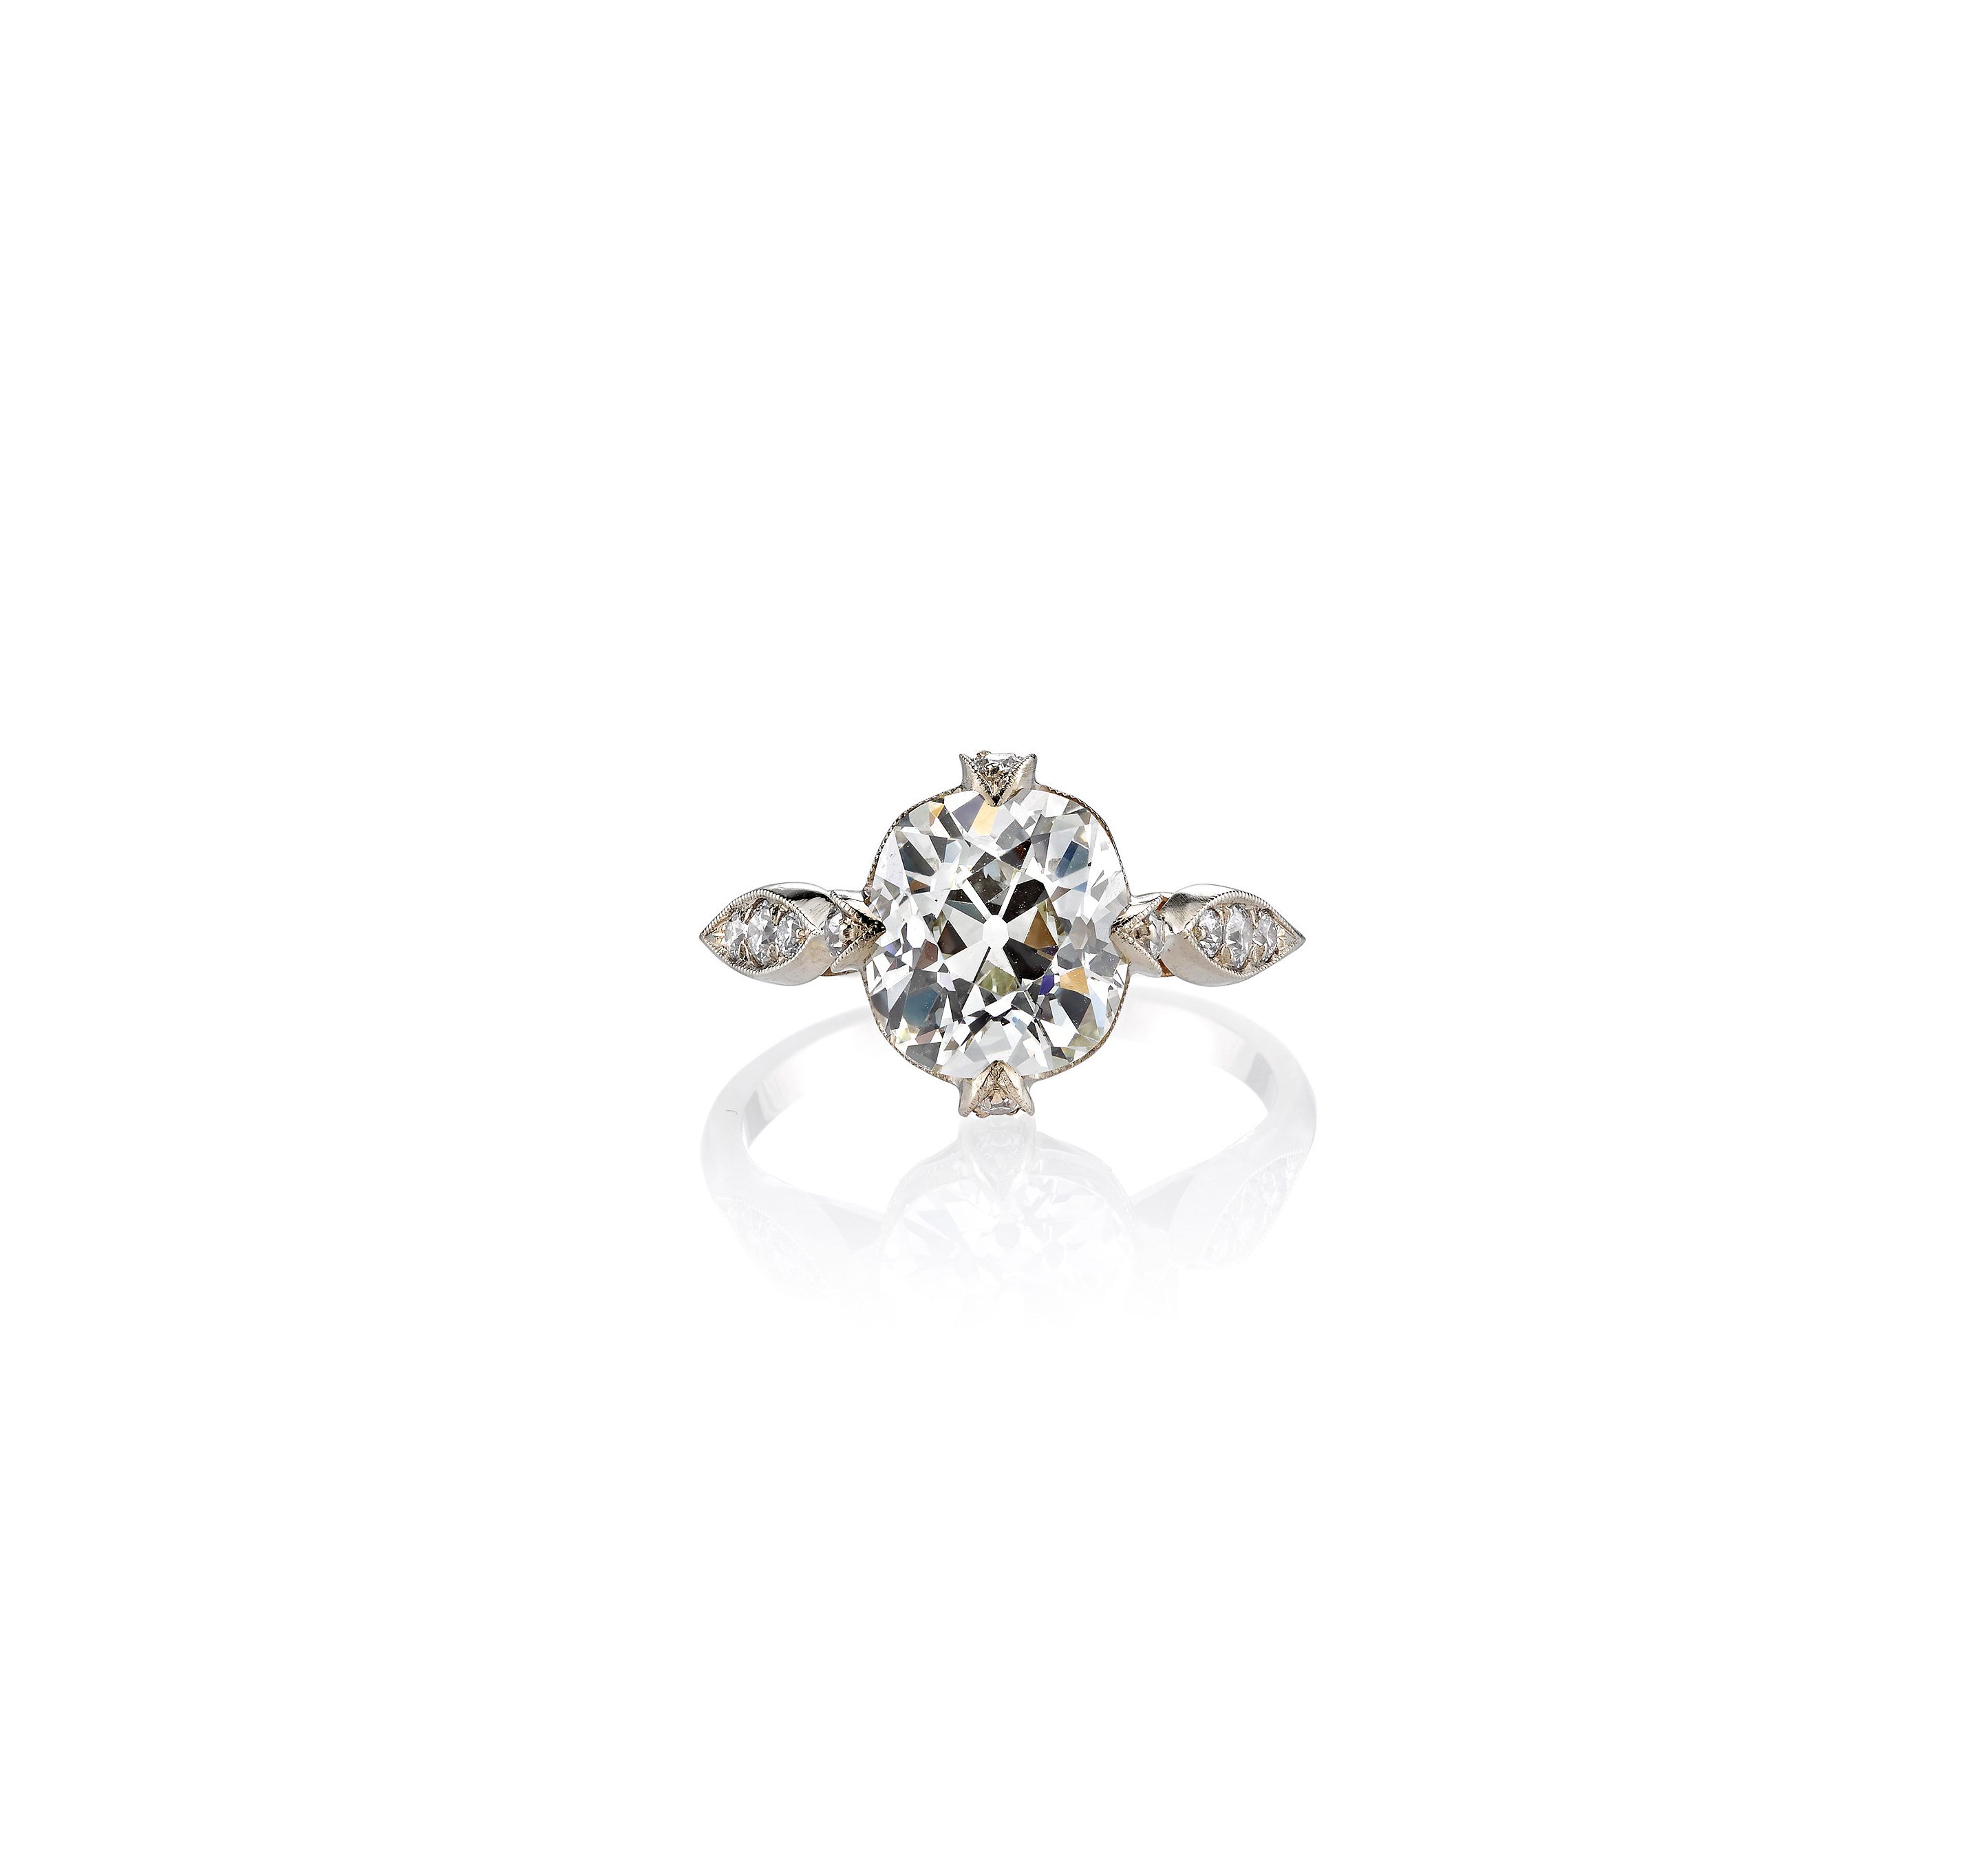 Cushion Cut Diamond Engagement Rings | Martha Stewart Weddings For Current Champagne And White Diamond Quilted Anniversary Rings In White Gold (View 15 of 25)